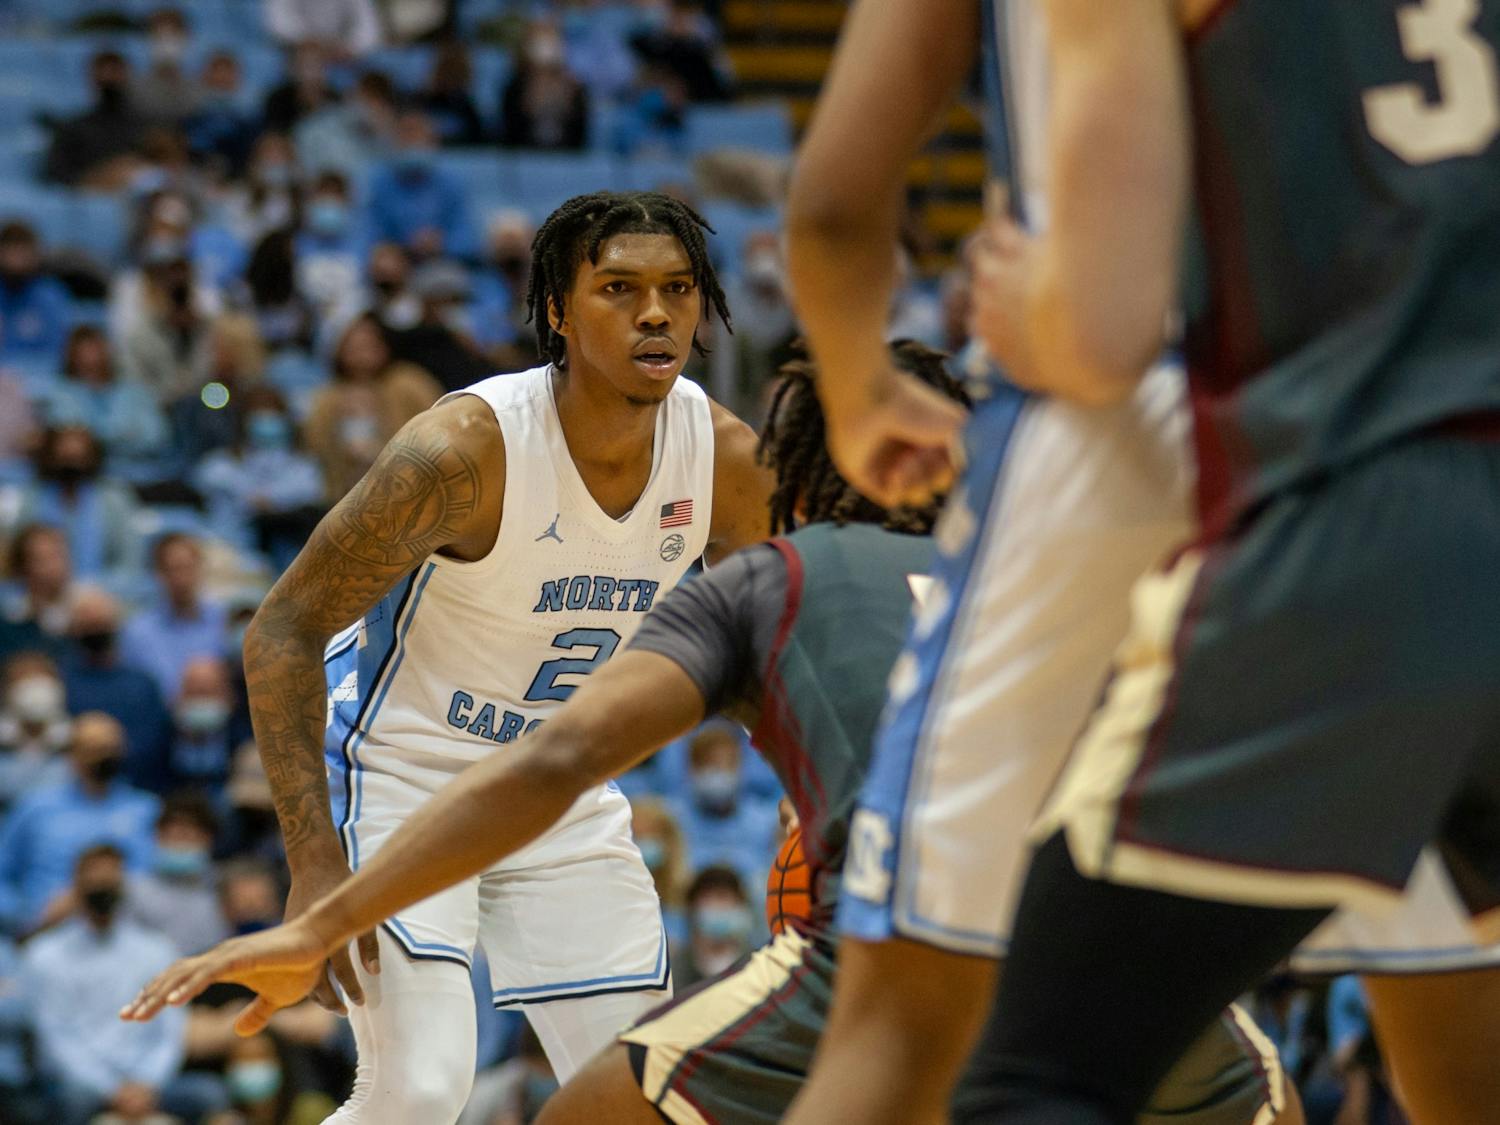 UNC sophomore guard Caleb Love (2) defends his opponent steadily during the men's basketball game against Boston College on Wednesday, Jan. 26, 2022, at the Dean Smith Center. UNC beat Boston College 58-47.